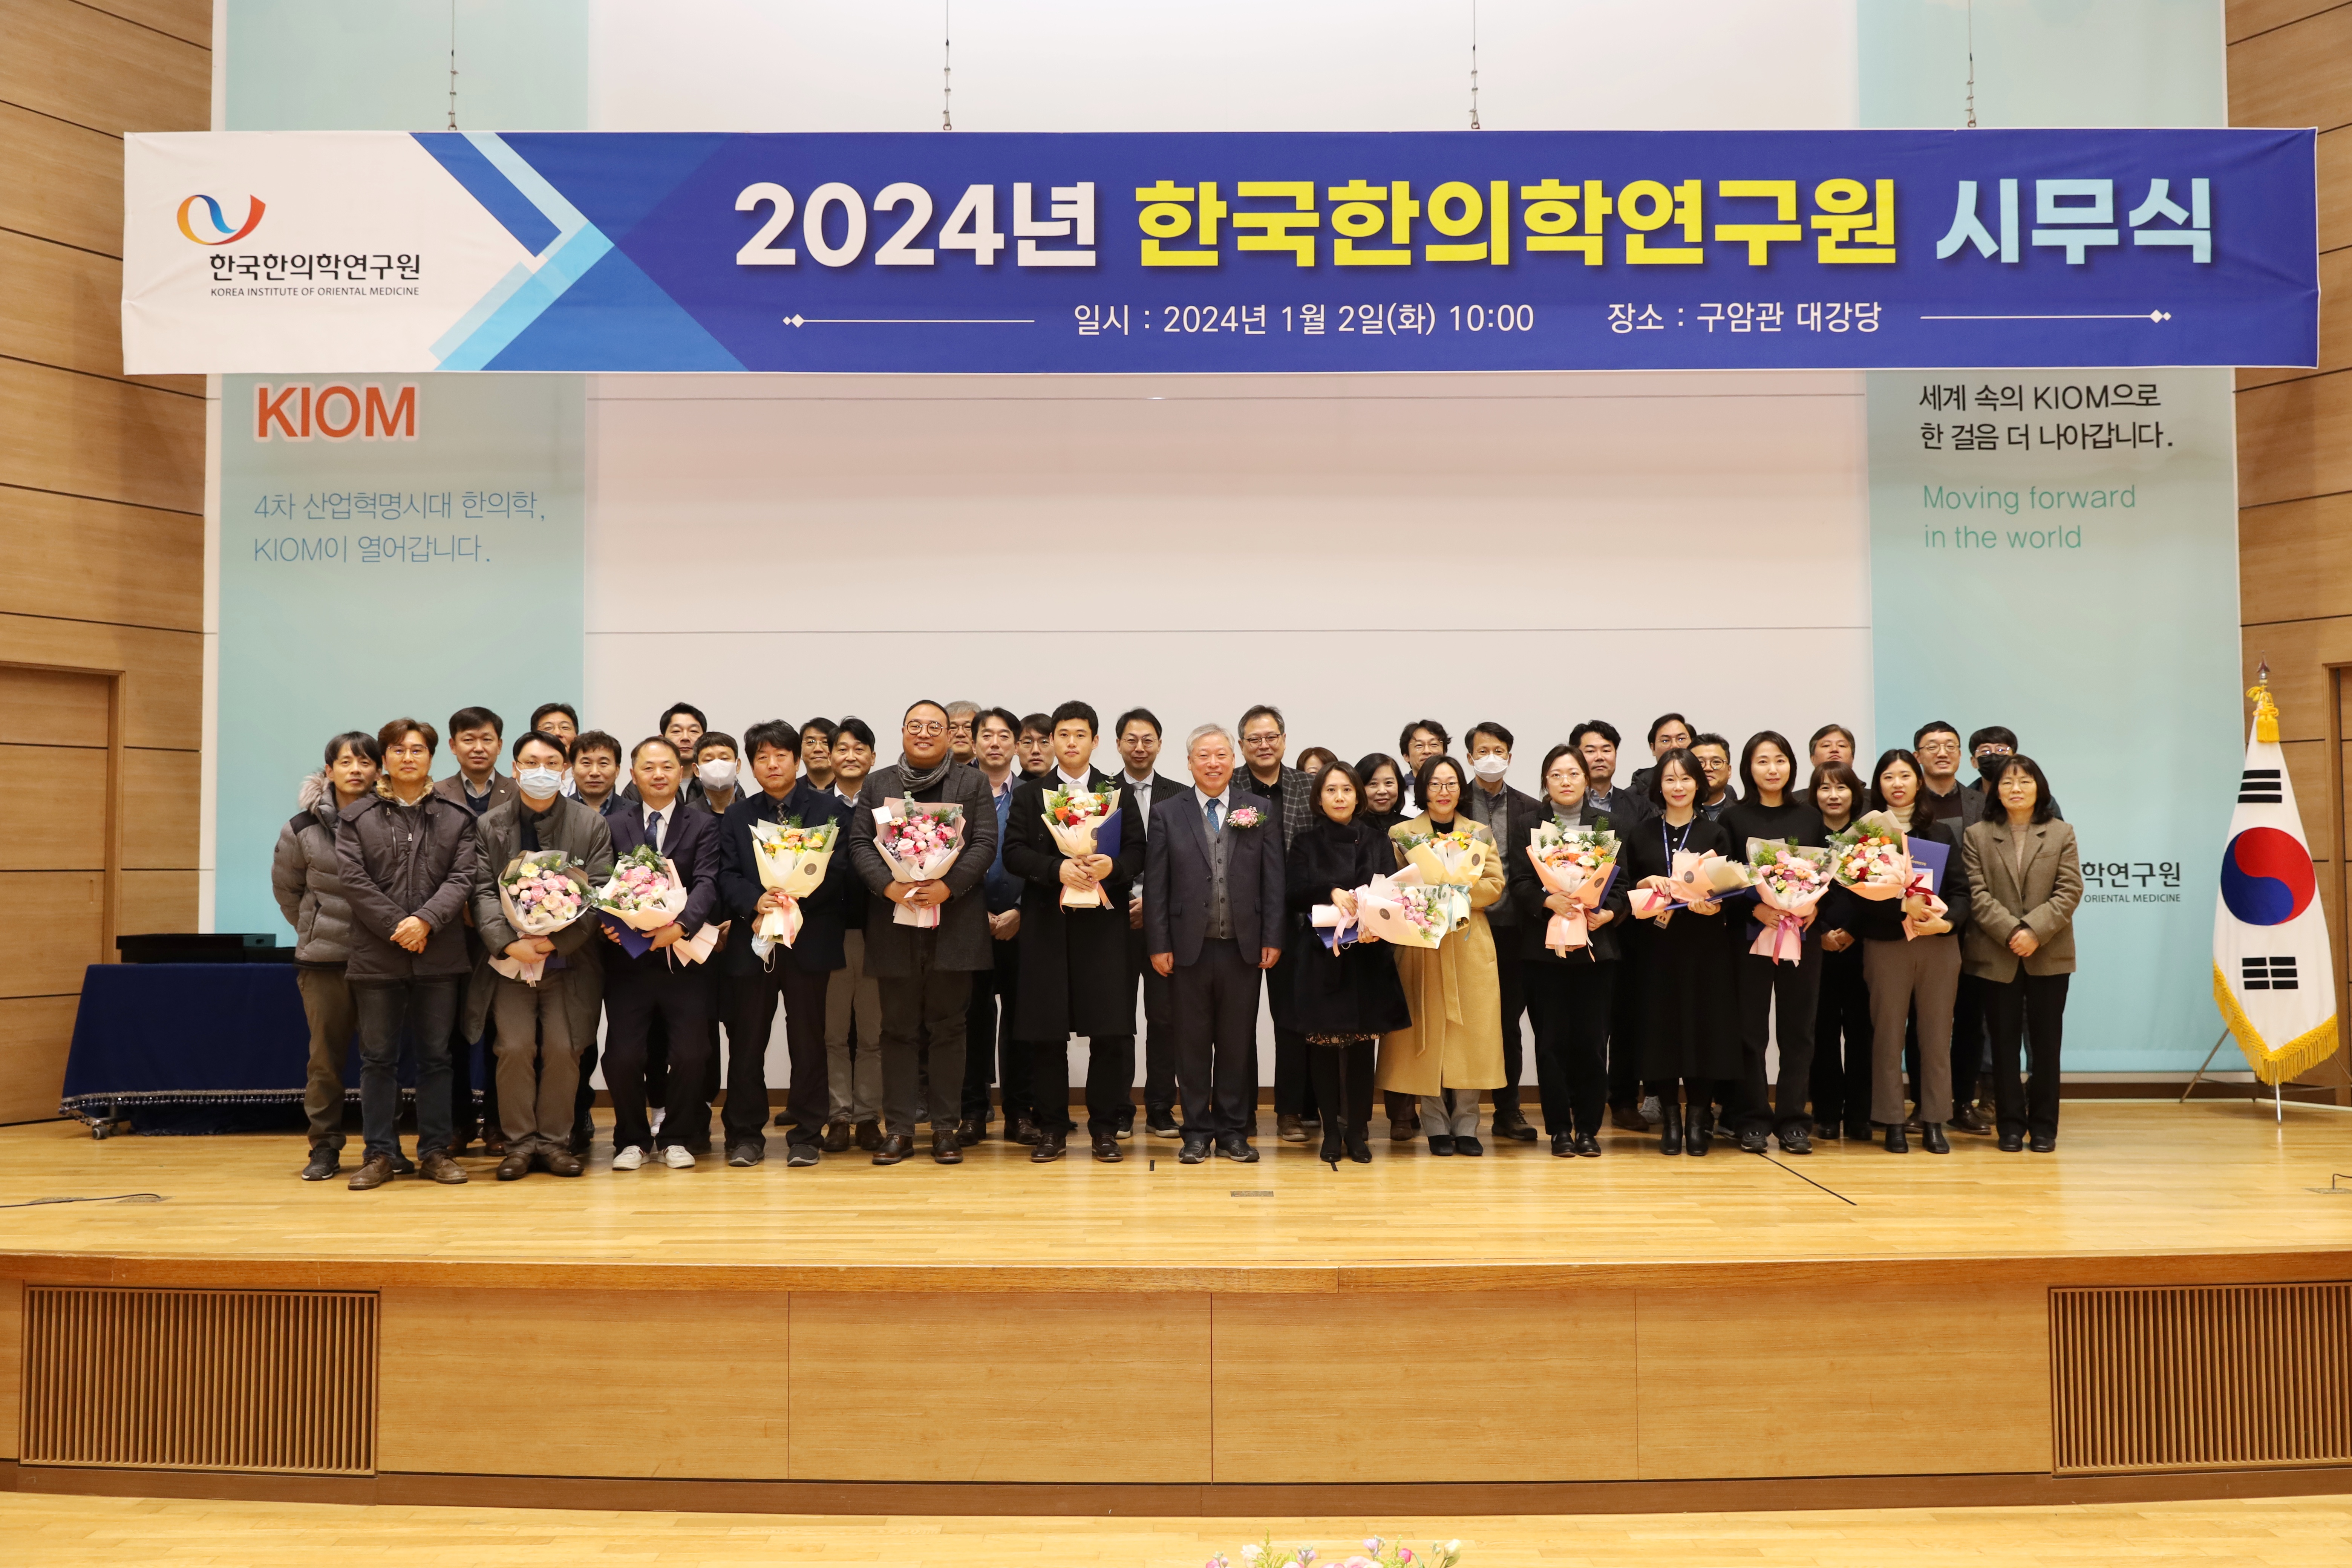 2024 Kick-off Meeting for the Year 사진1